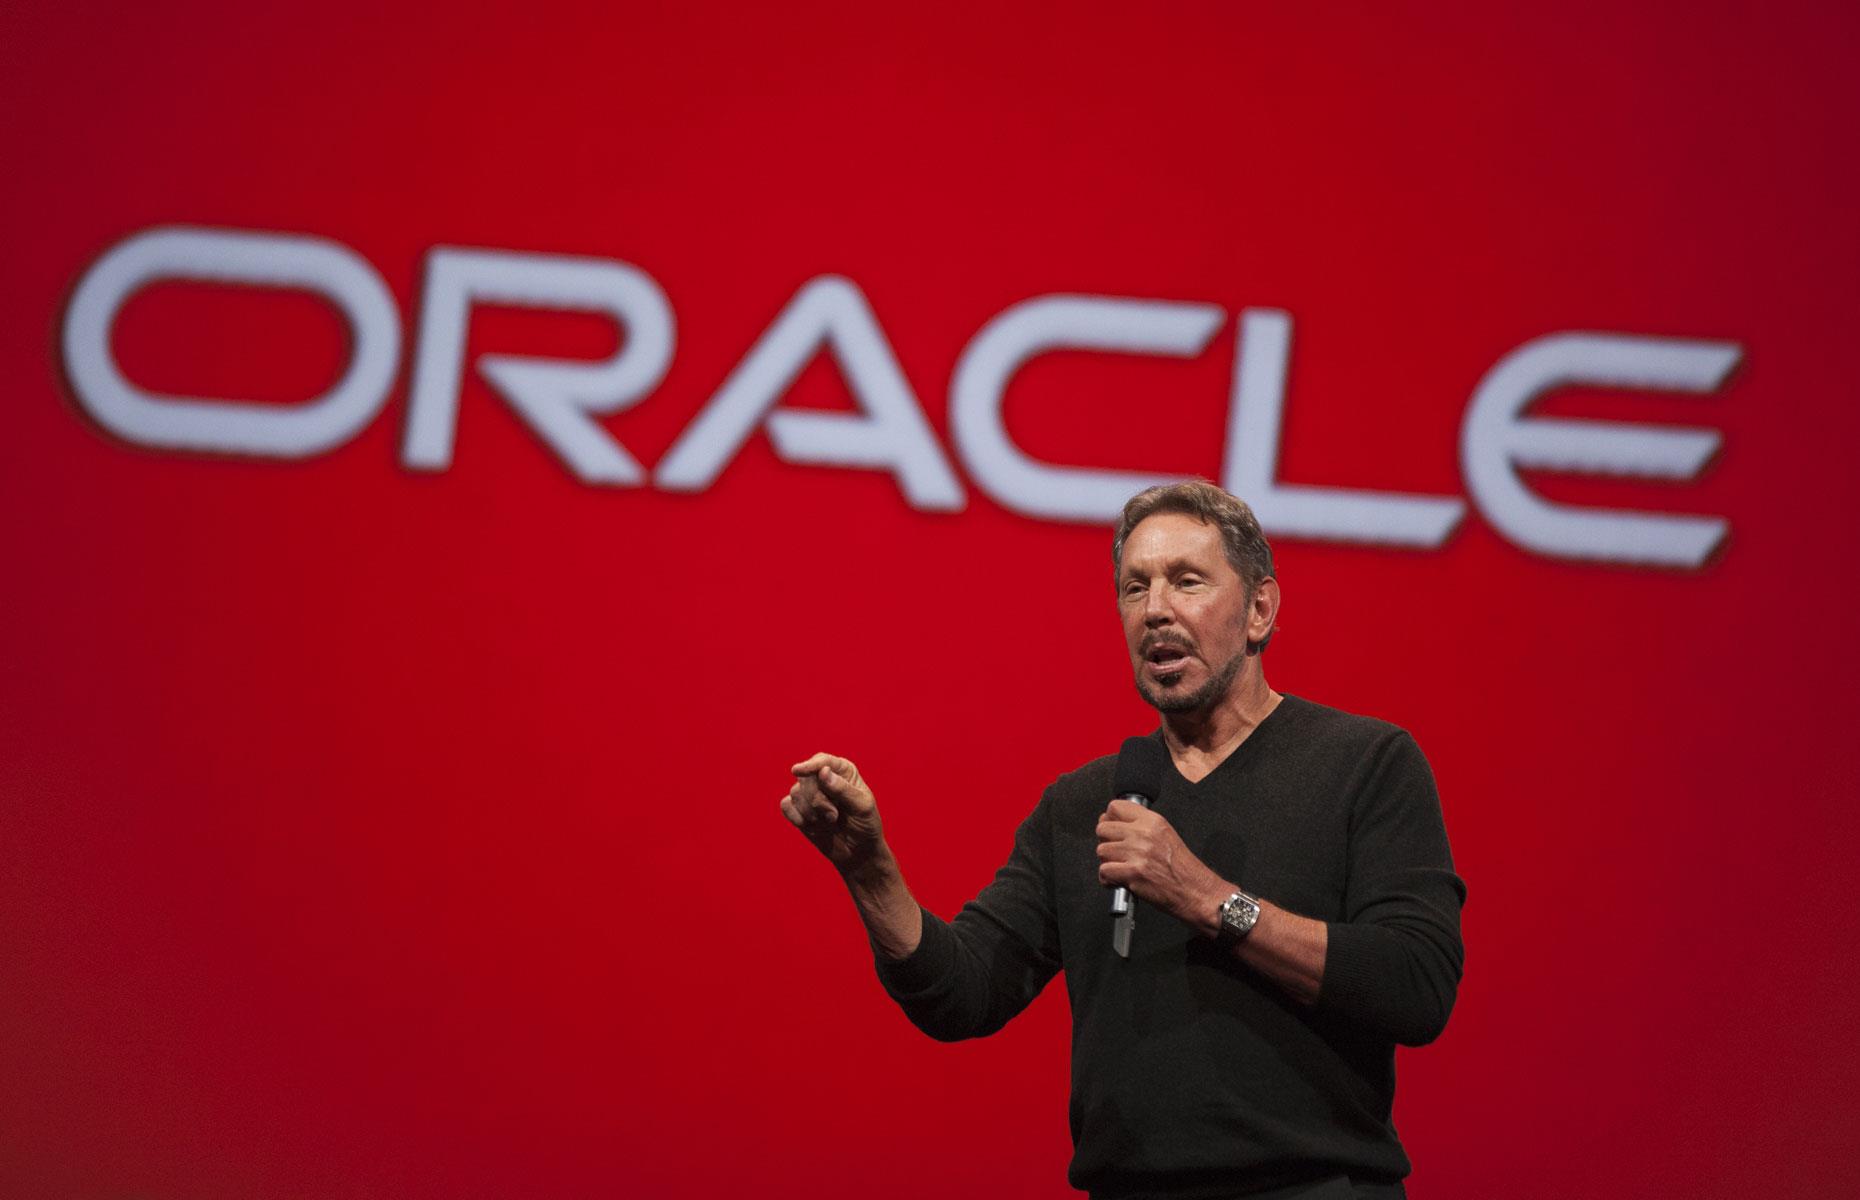 Larry Ellison has villas, golf clubs, mansions and more